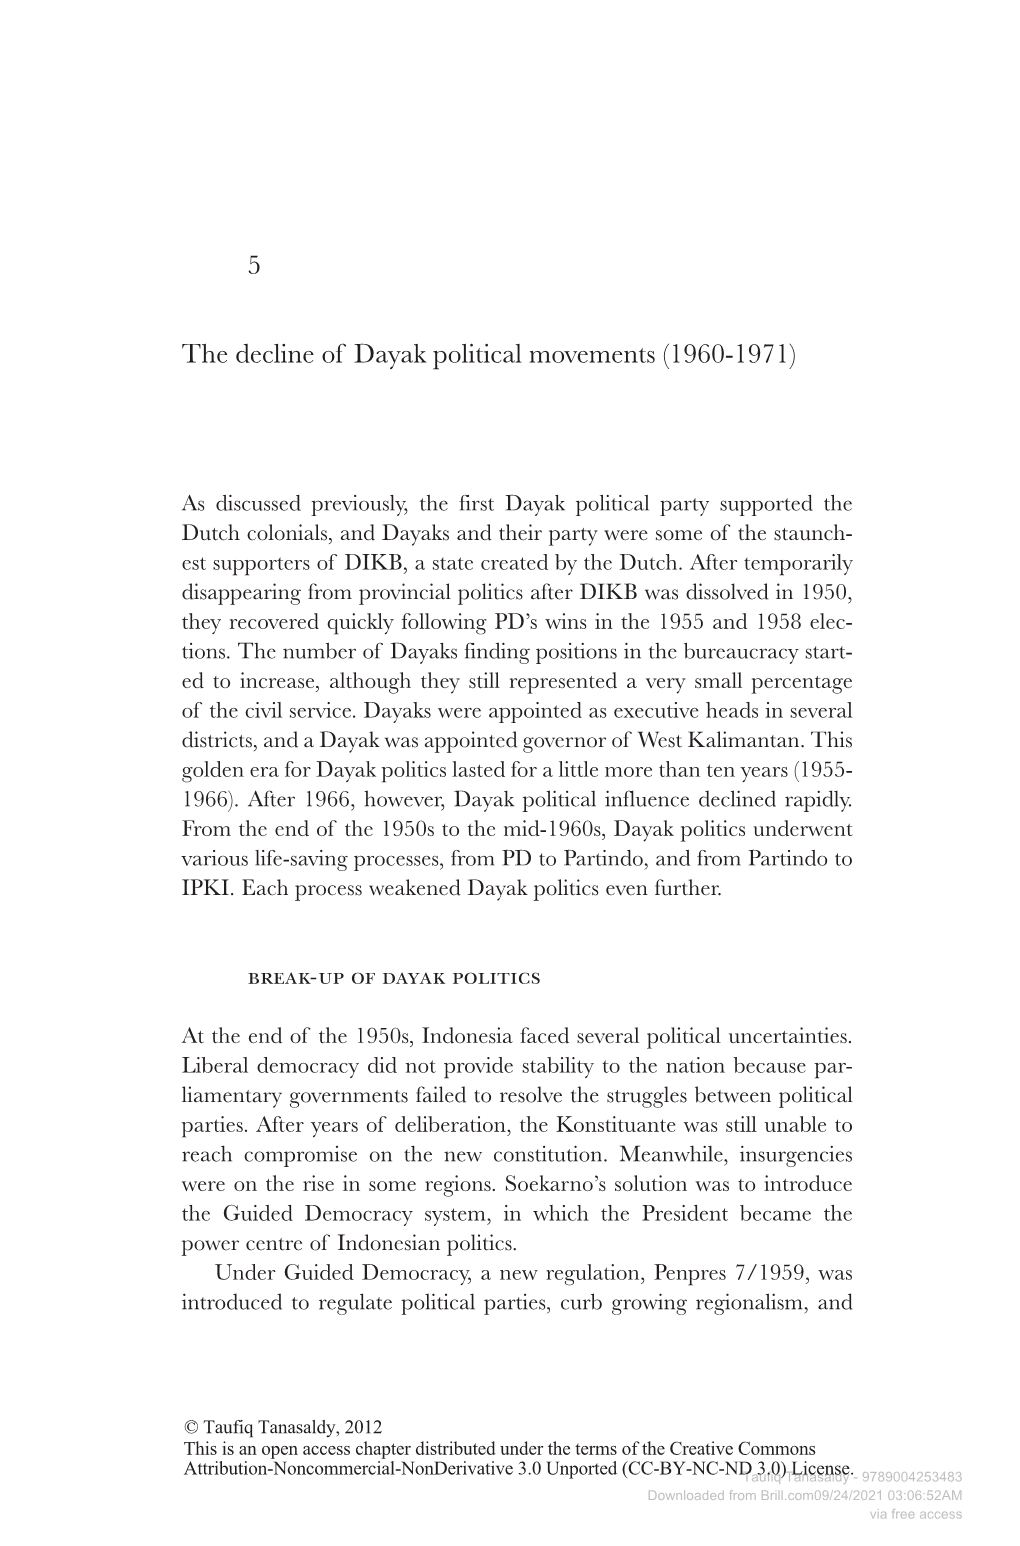 5 the Decline of Dayak Political Movements (1960-1971) |